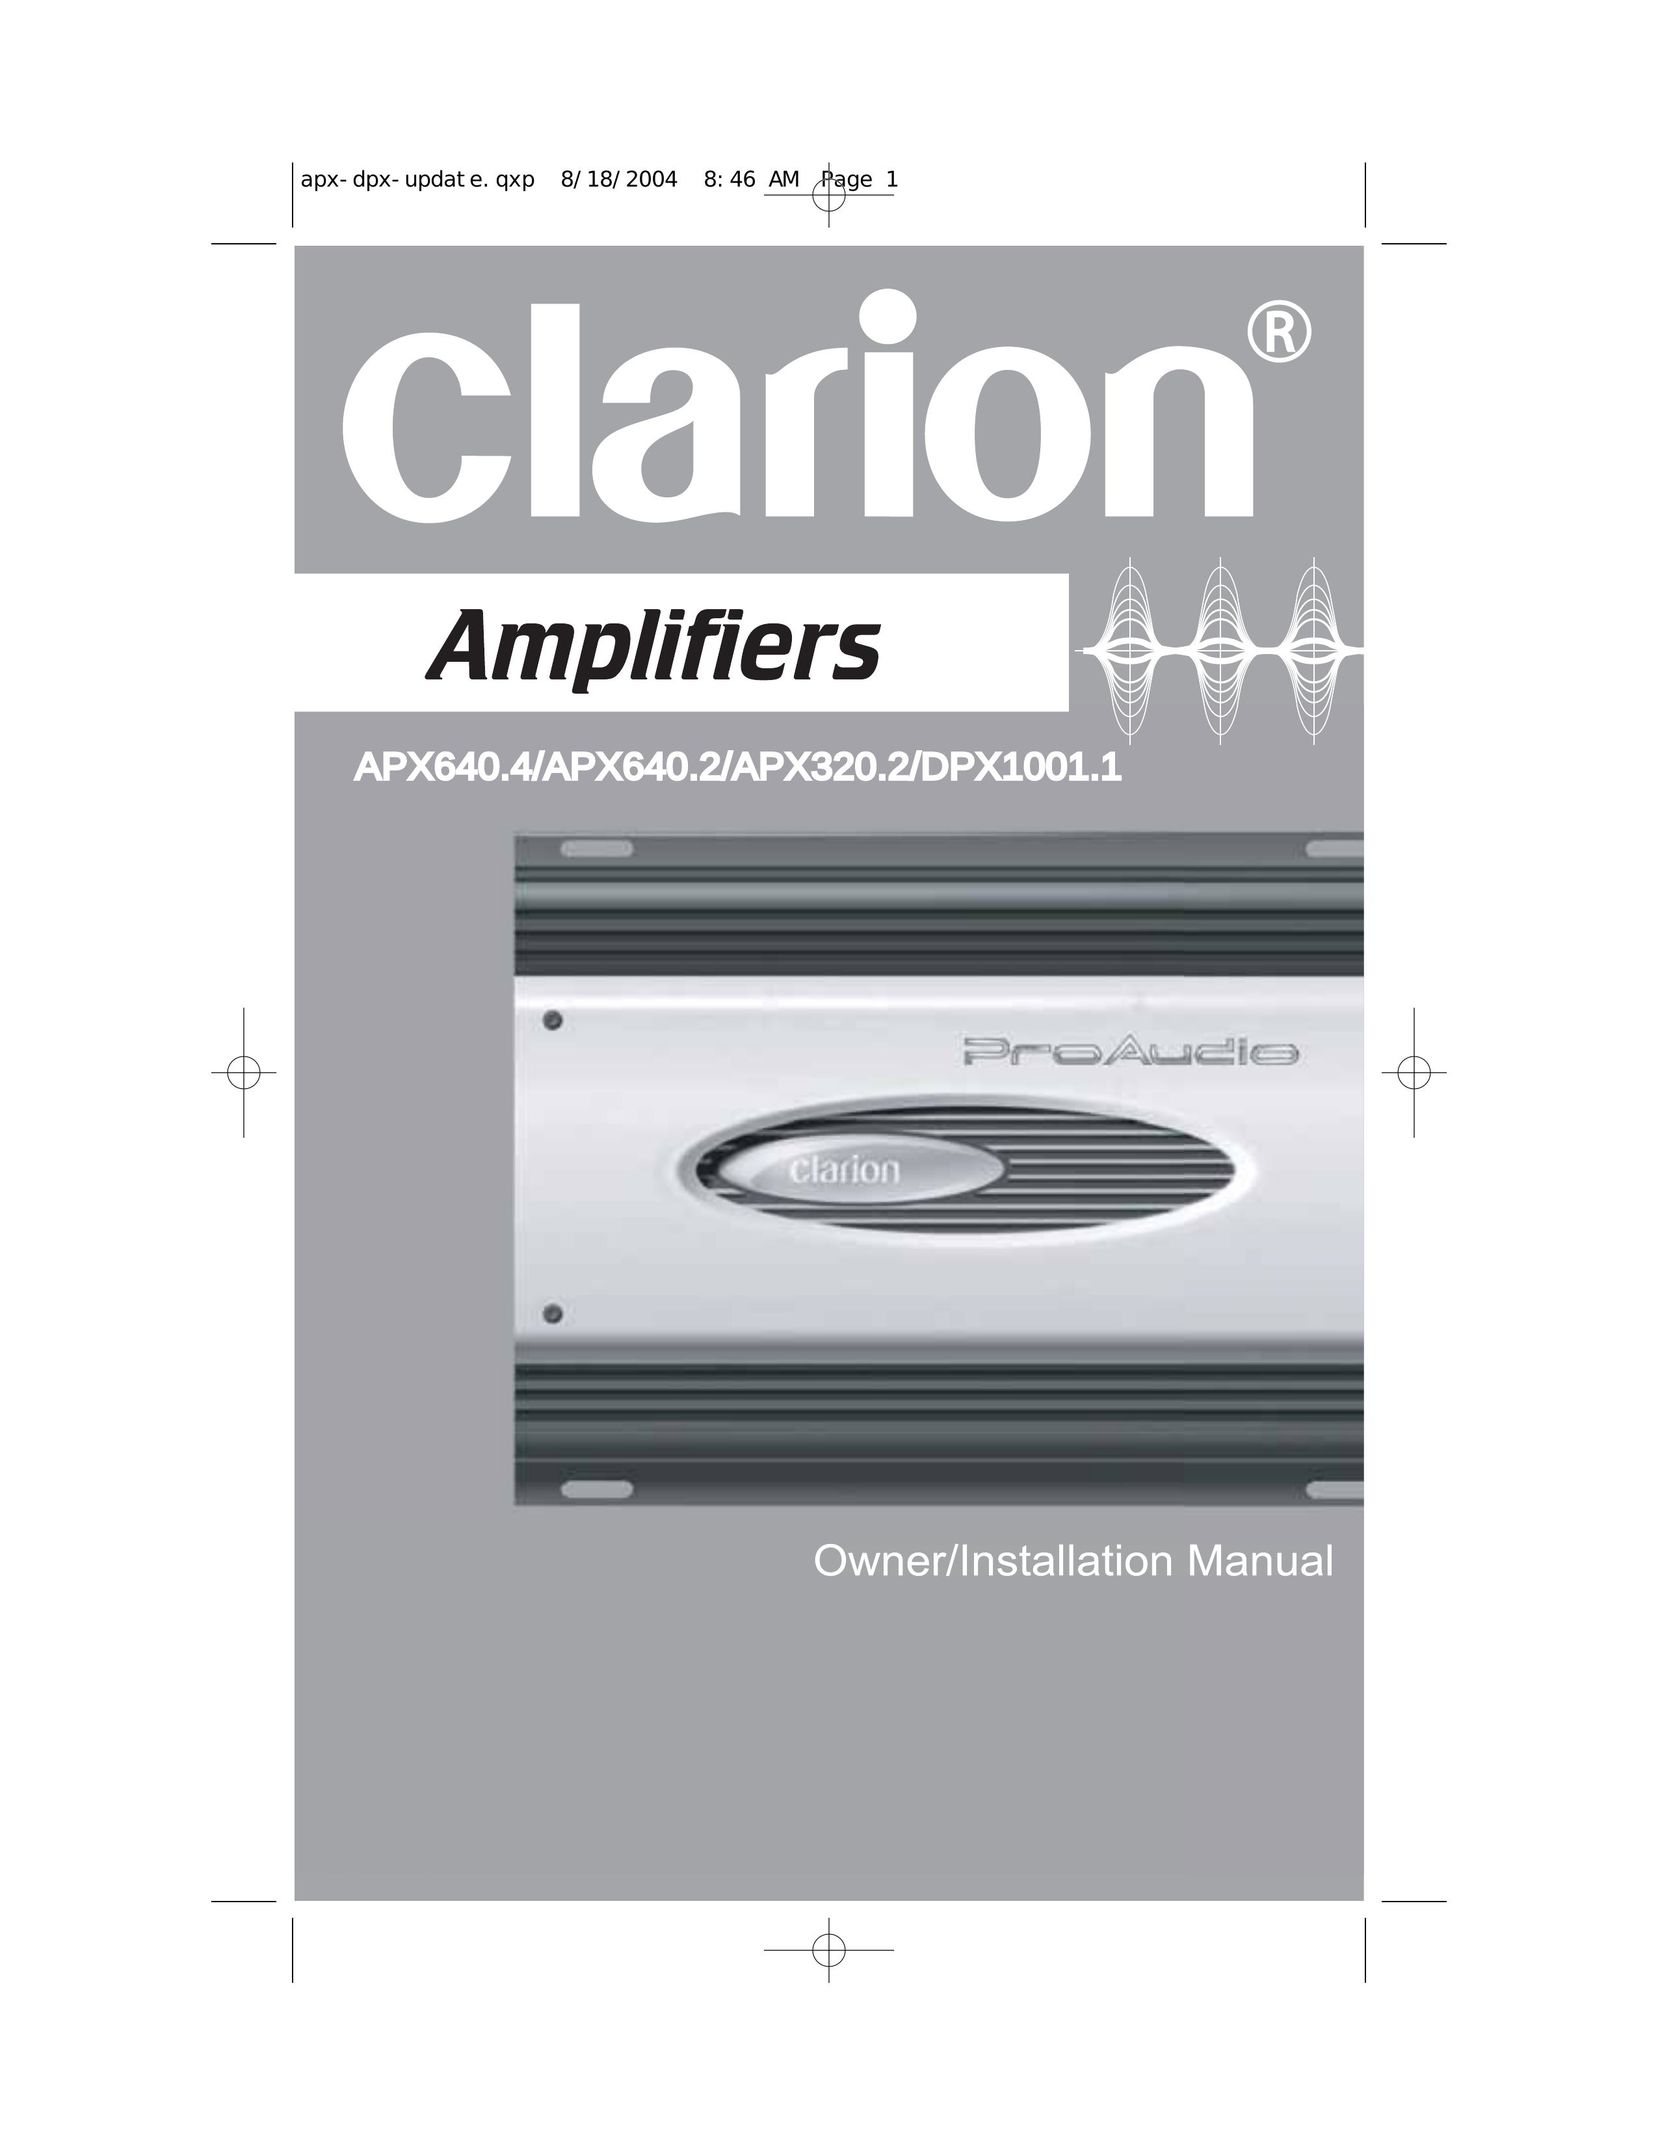 Clarion APX640.2 Stereo Amplifier User Manual